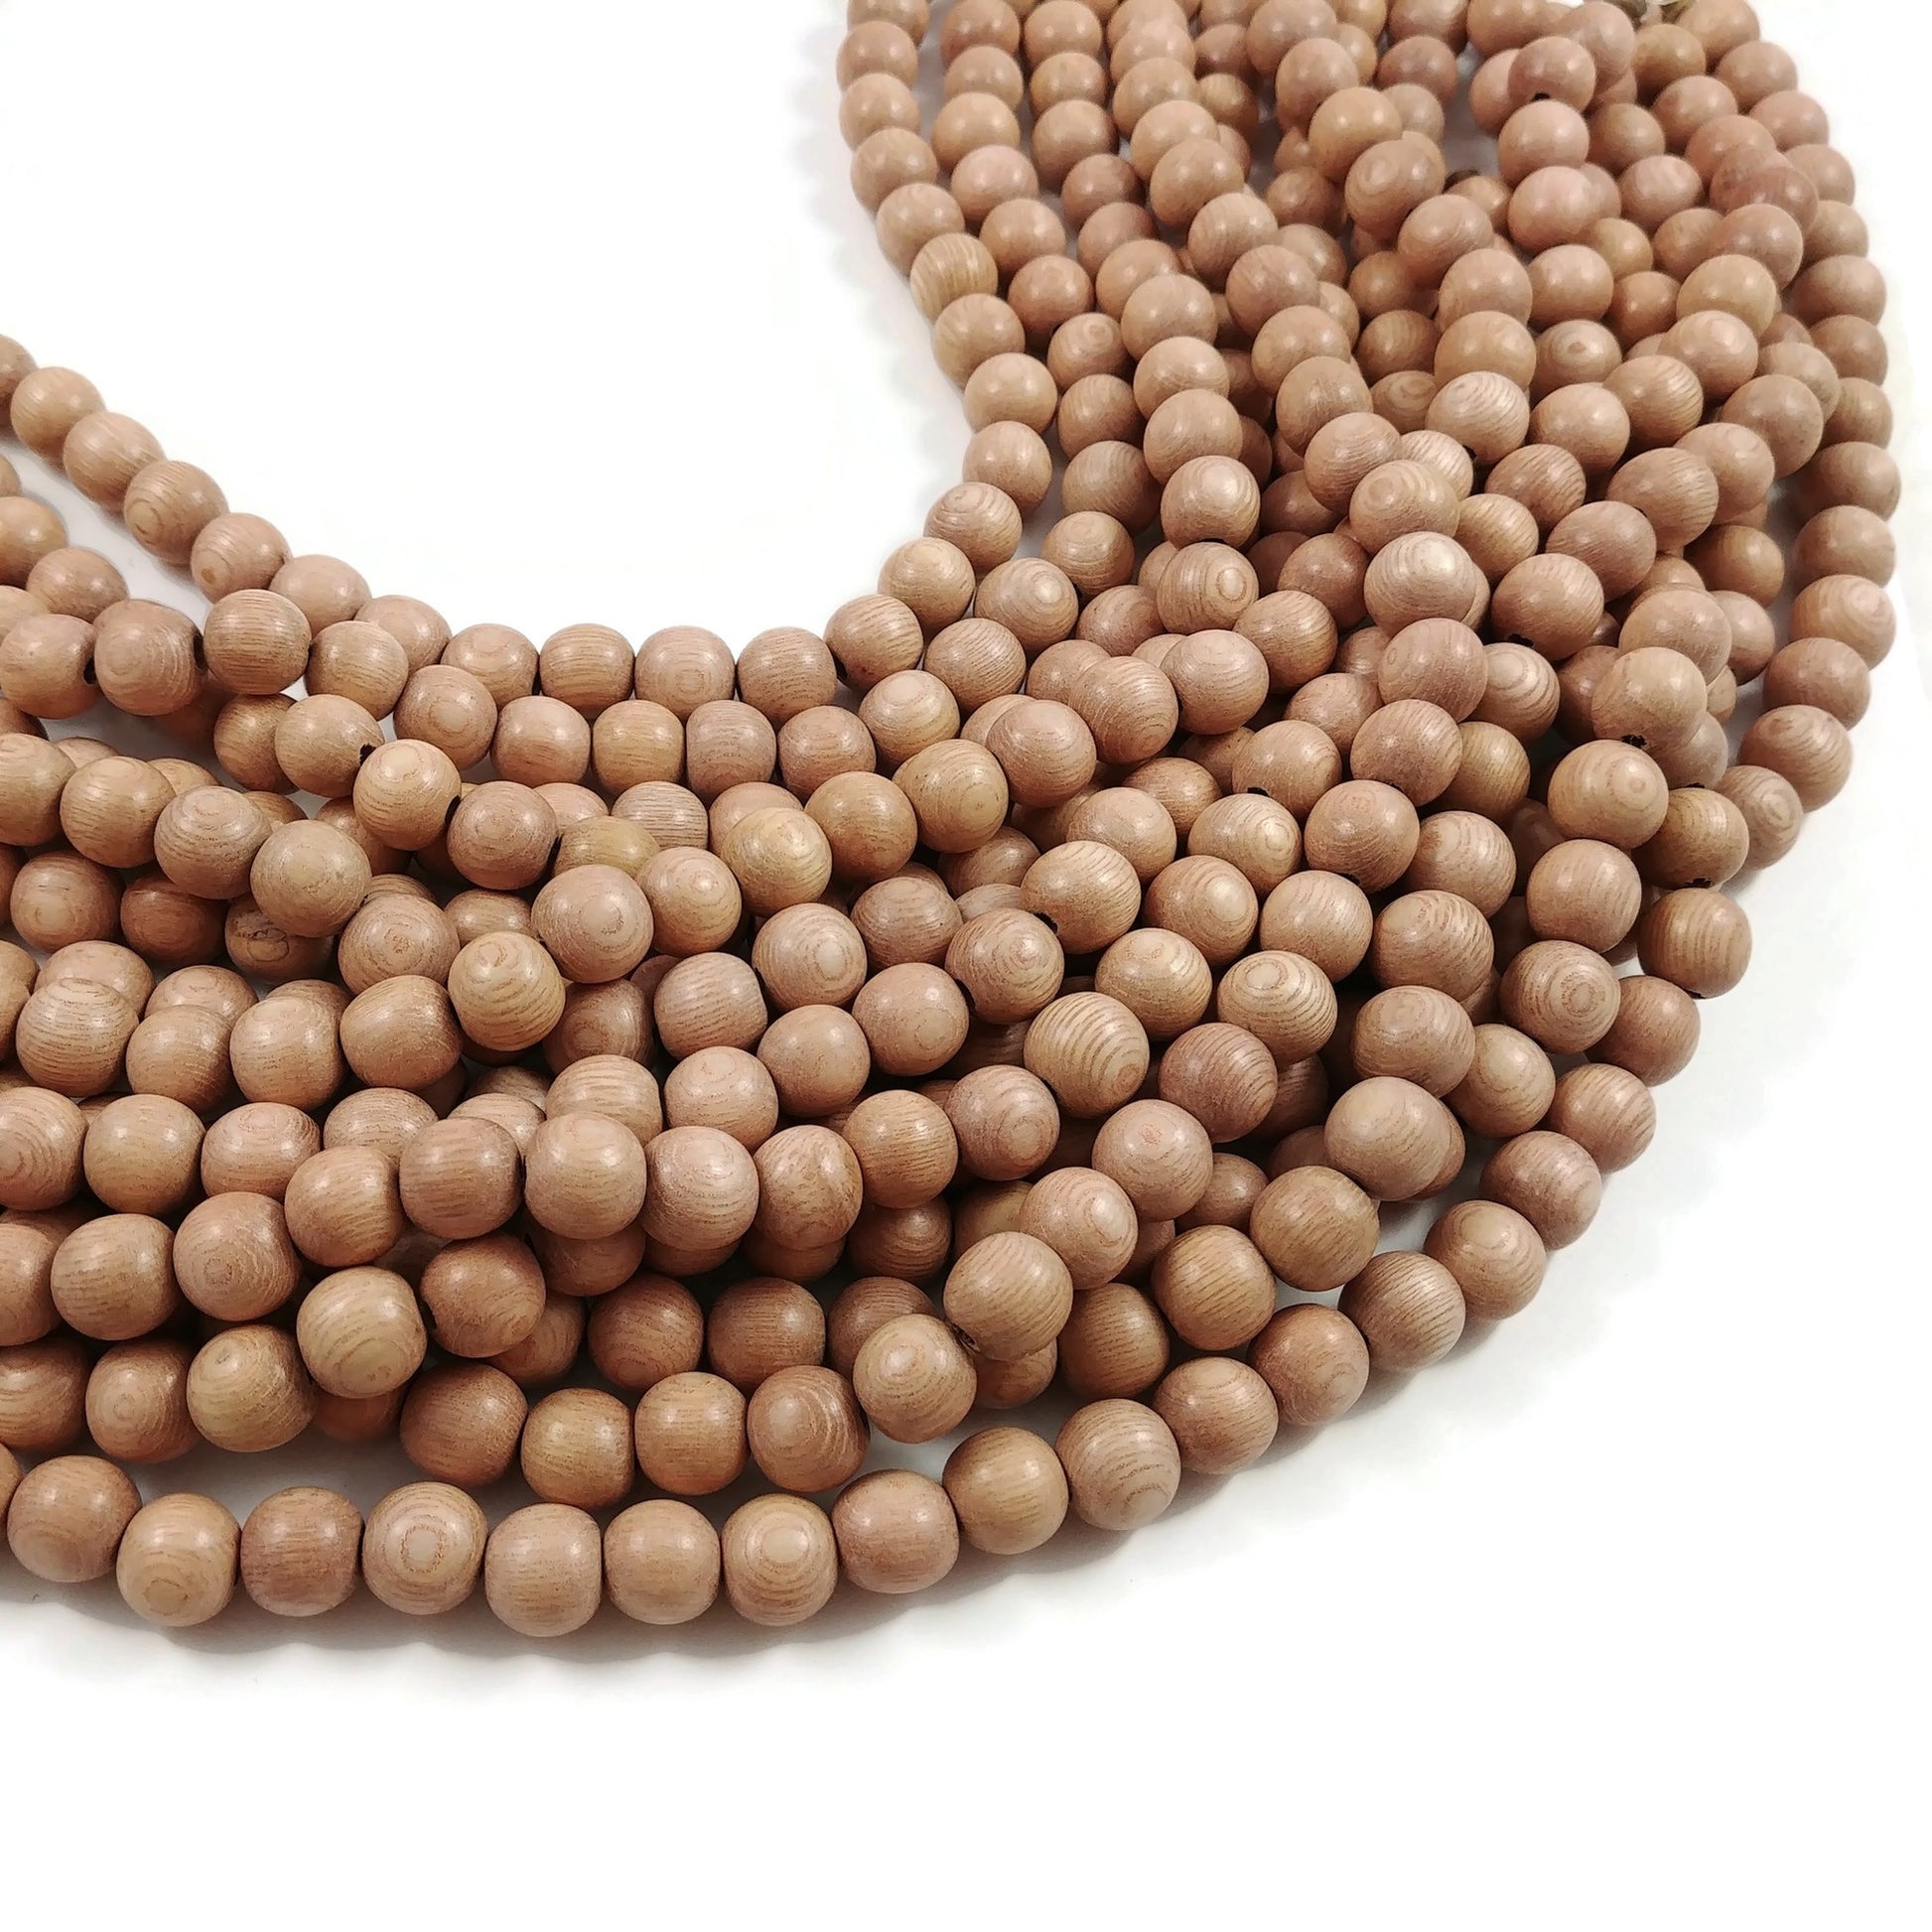 Rosewood beads 4, 5, 6, 8 or 10mm - Natural Mala Wooden Beads